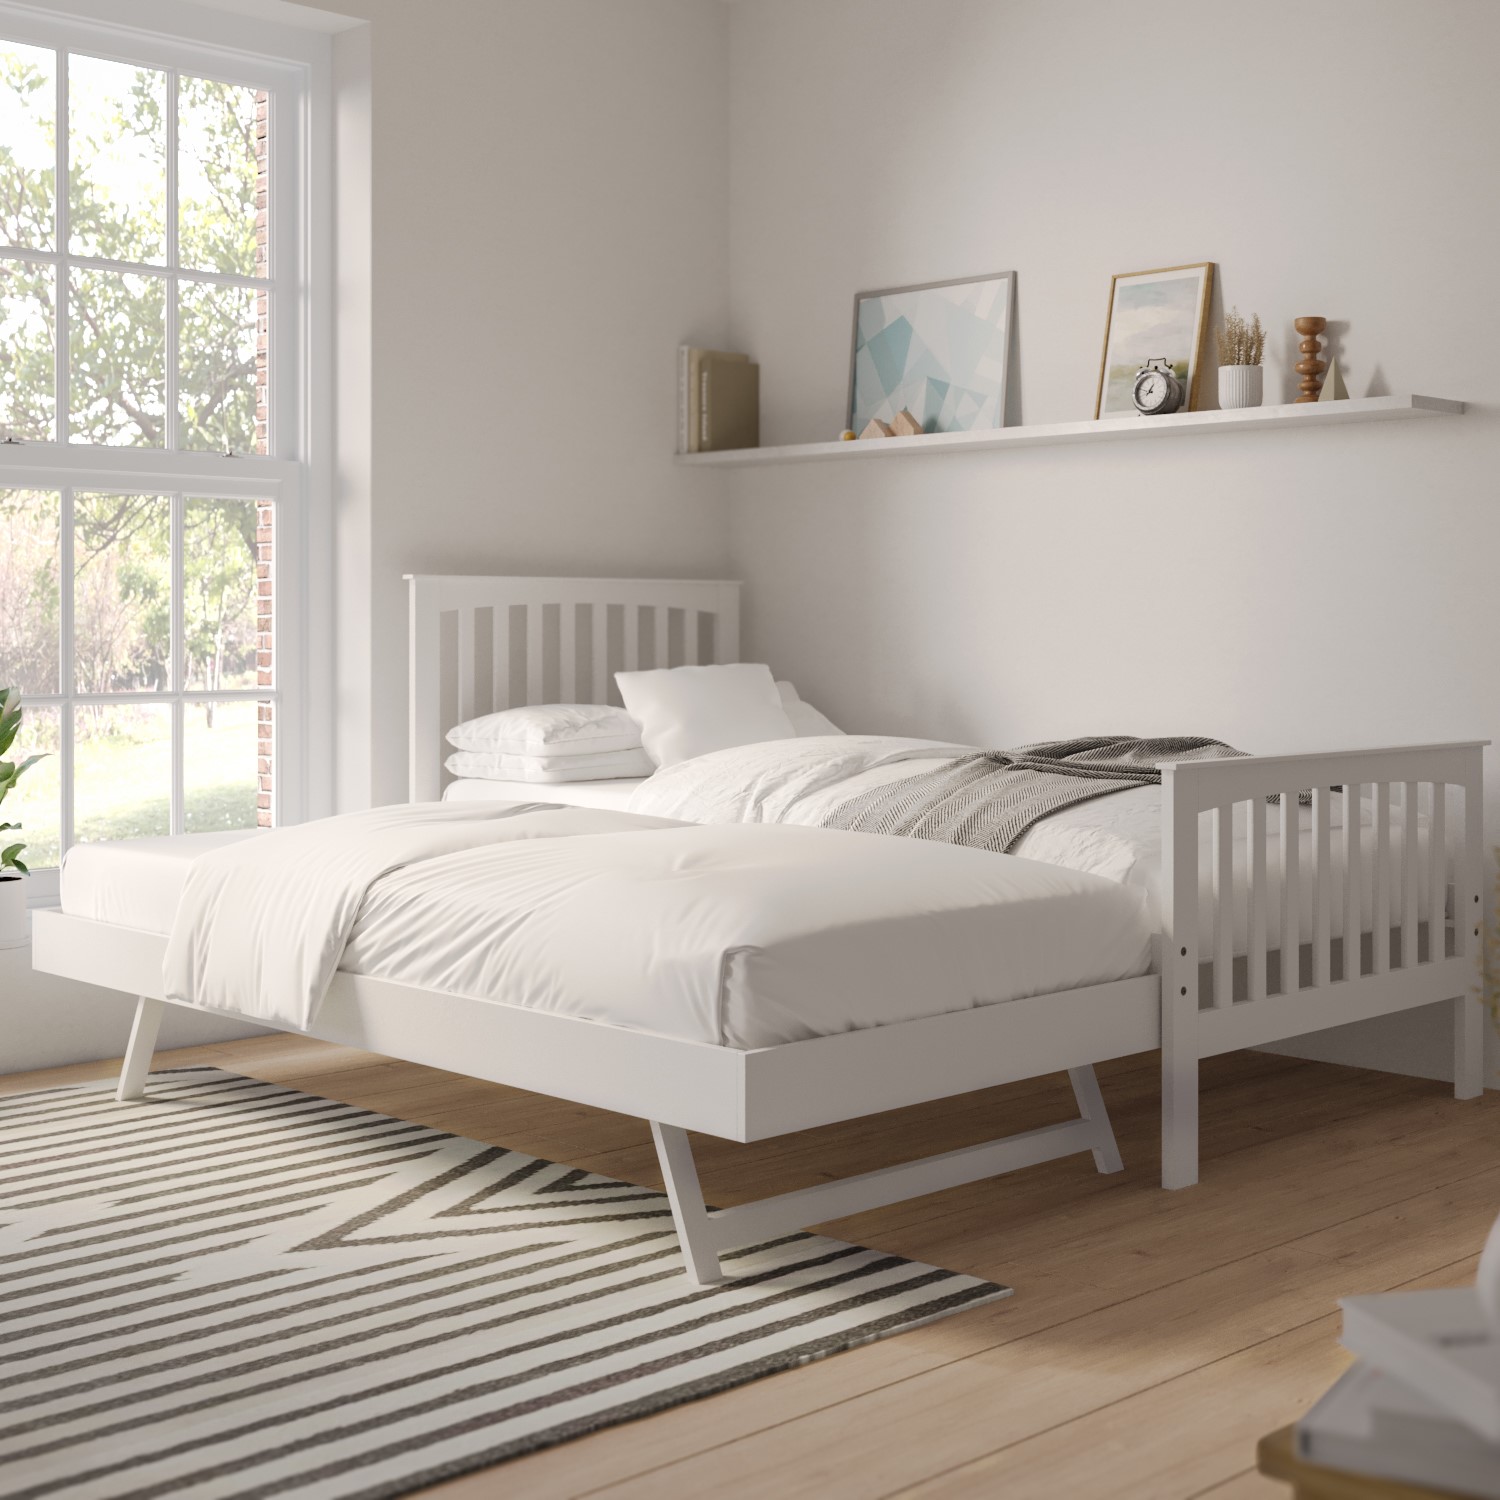 Photo of Oxford guest bed in cream with pop-up trundle